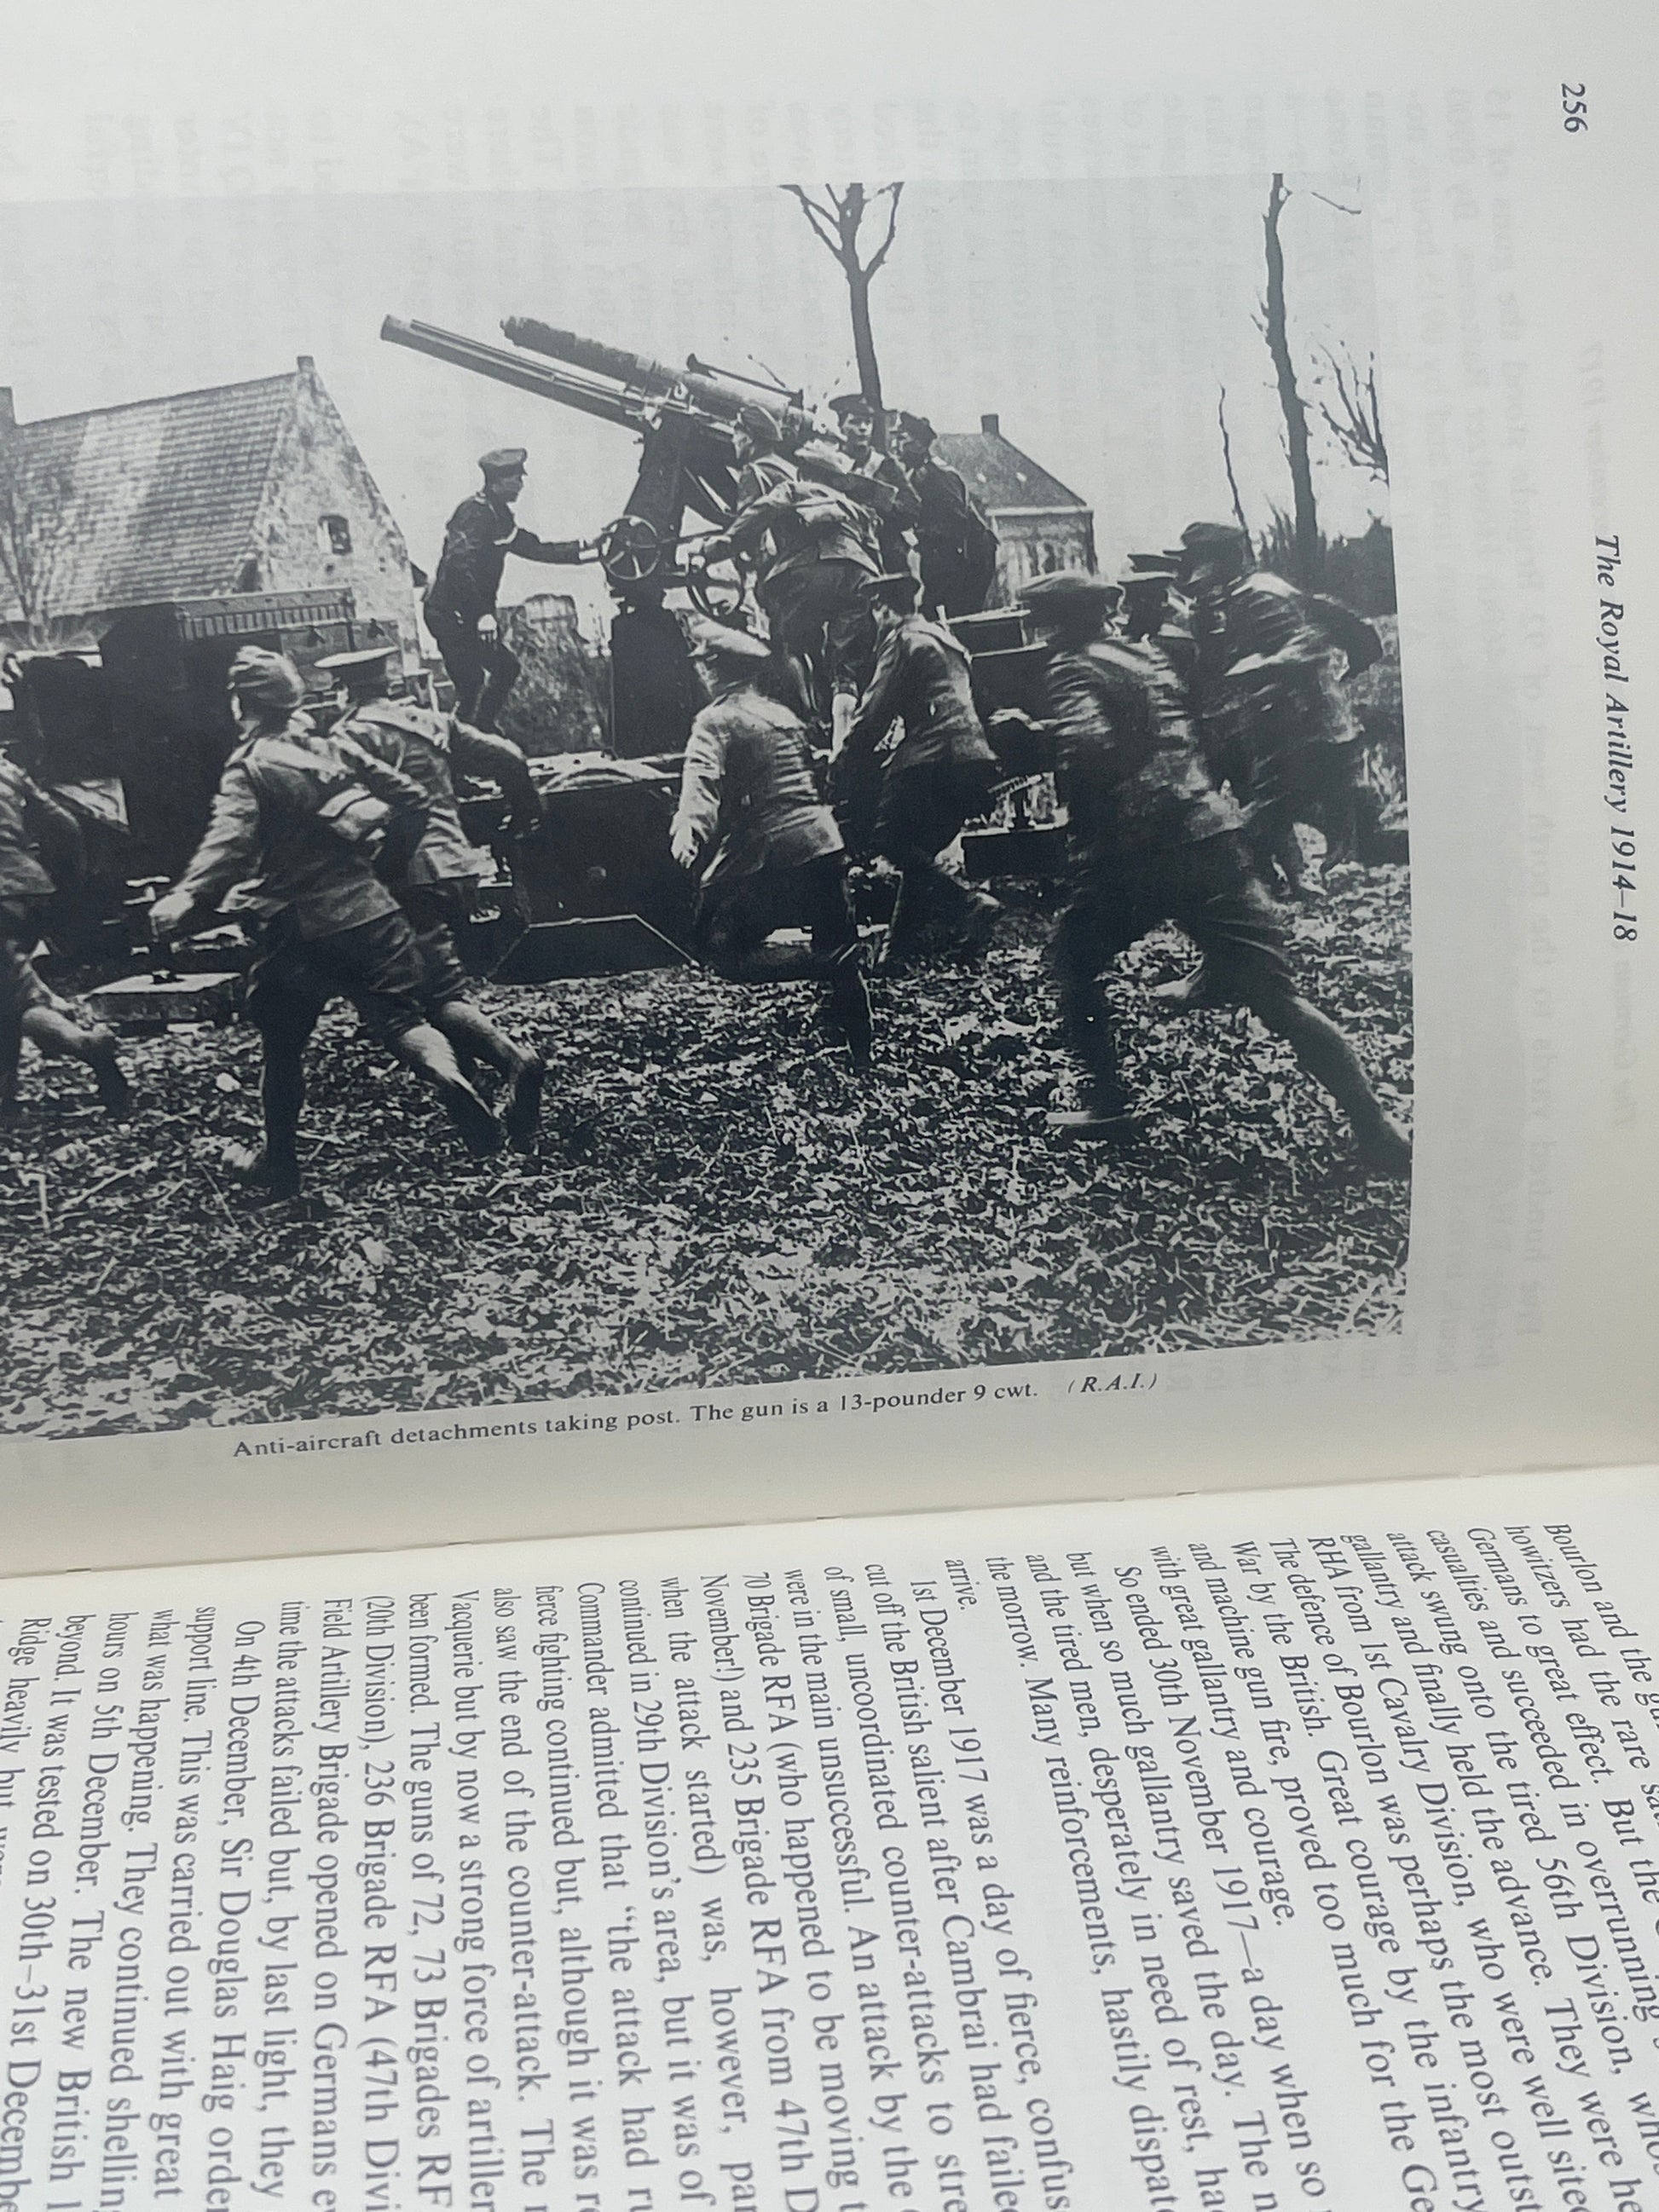 History of the Royal Regiment of Artillery Western Front 1914-18 by General Sir Martin Farndale KCB